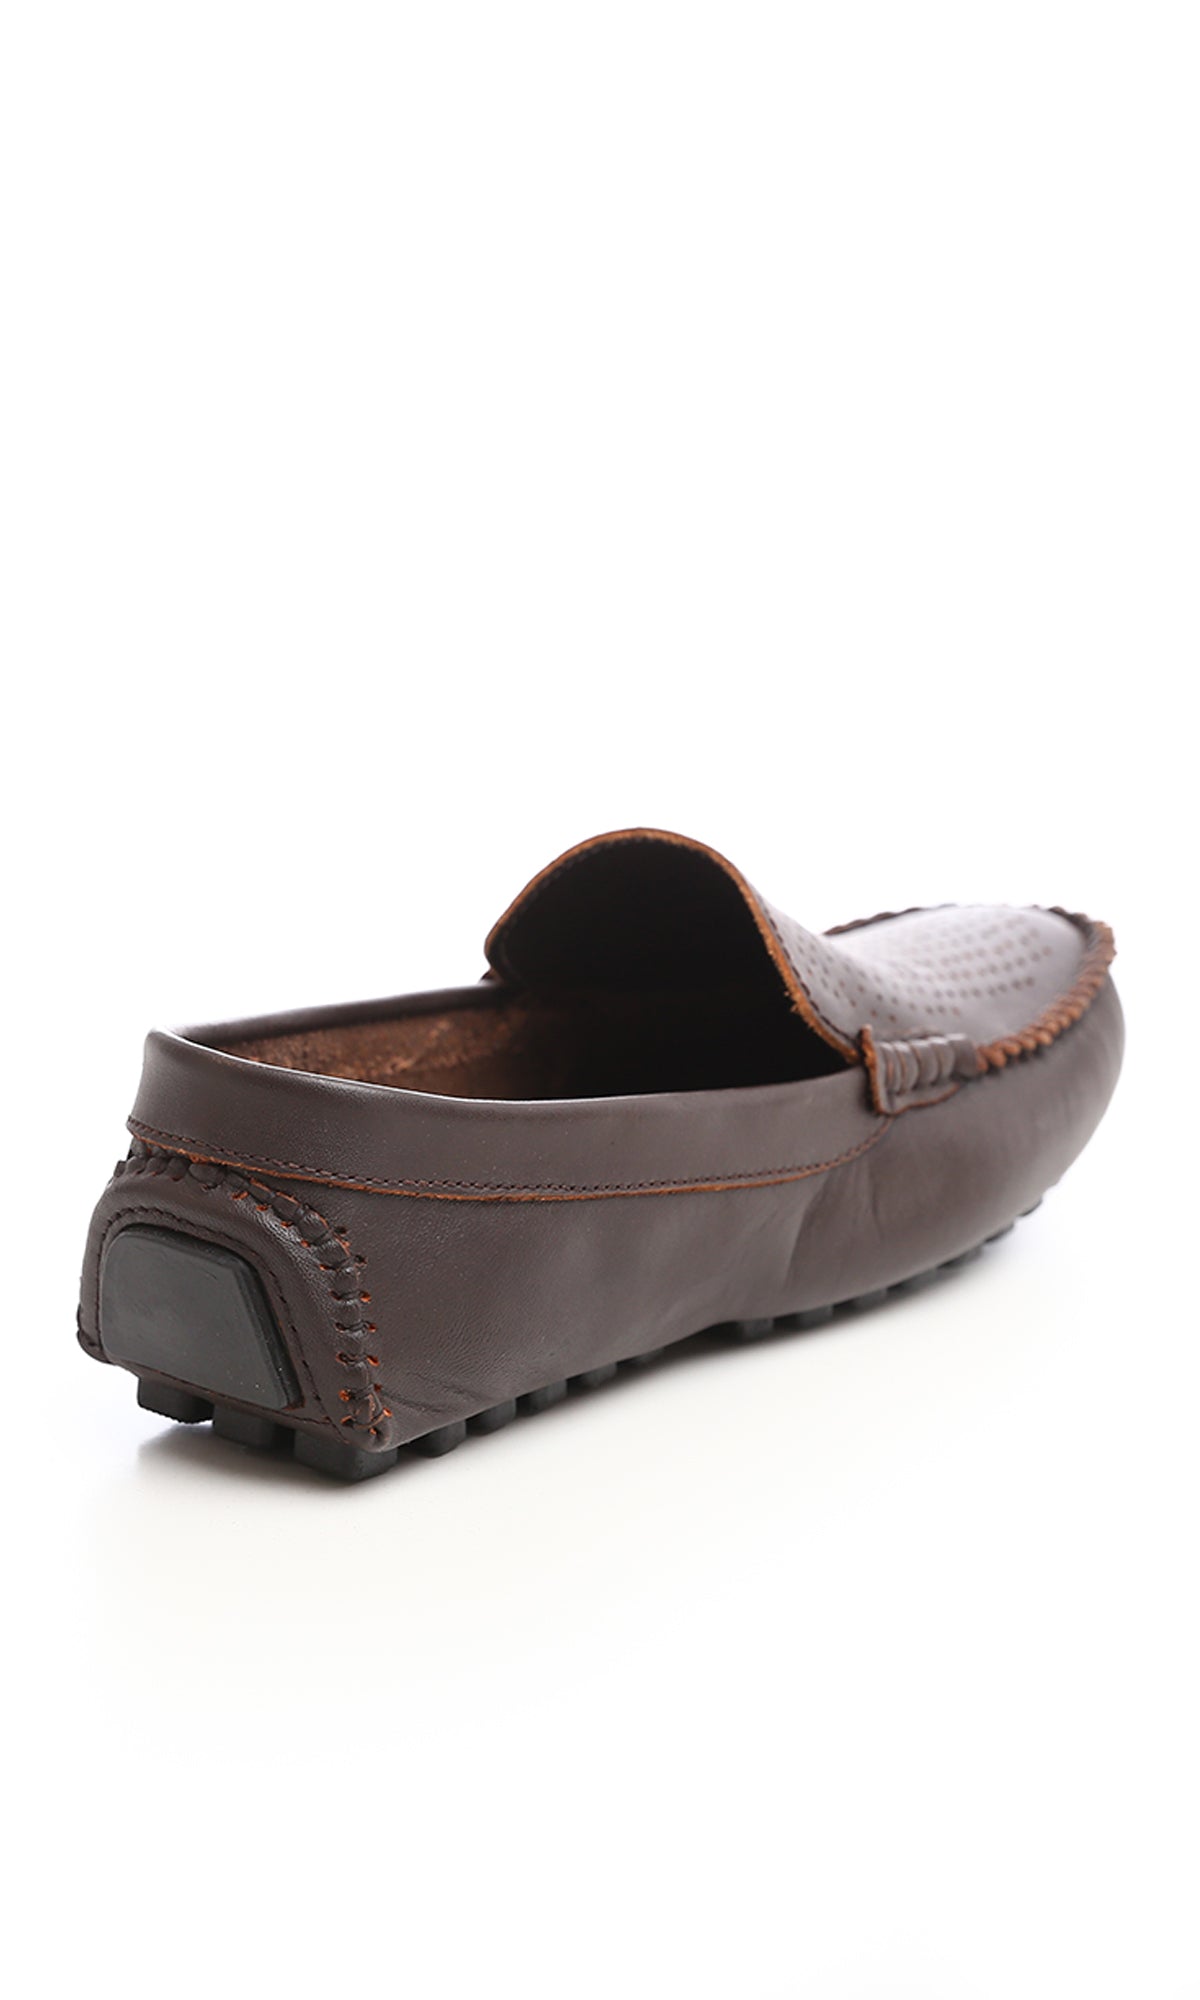 O174707 Slip On Leather Dark Brown Loafers